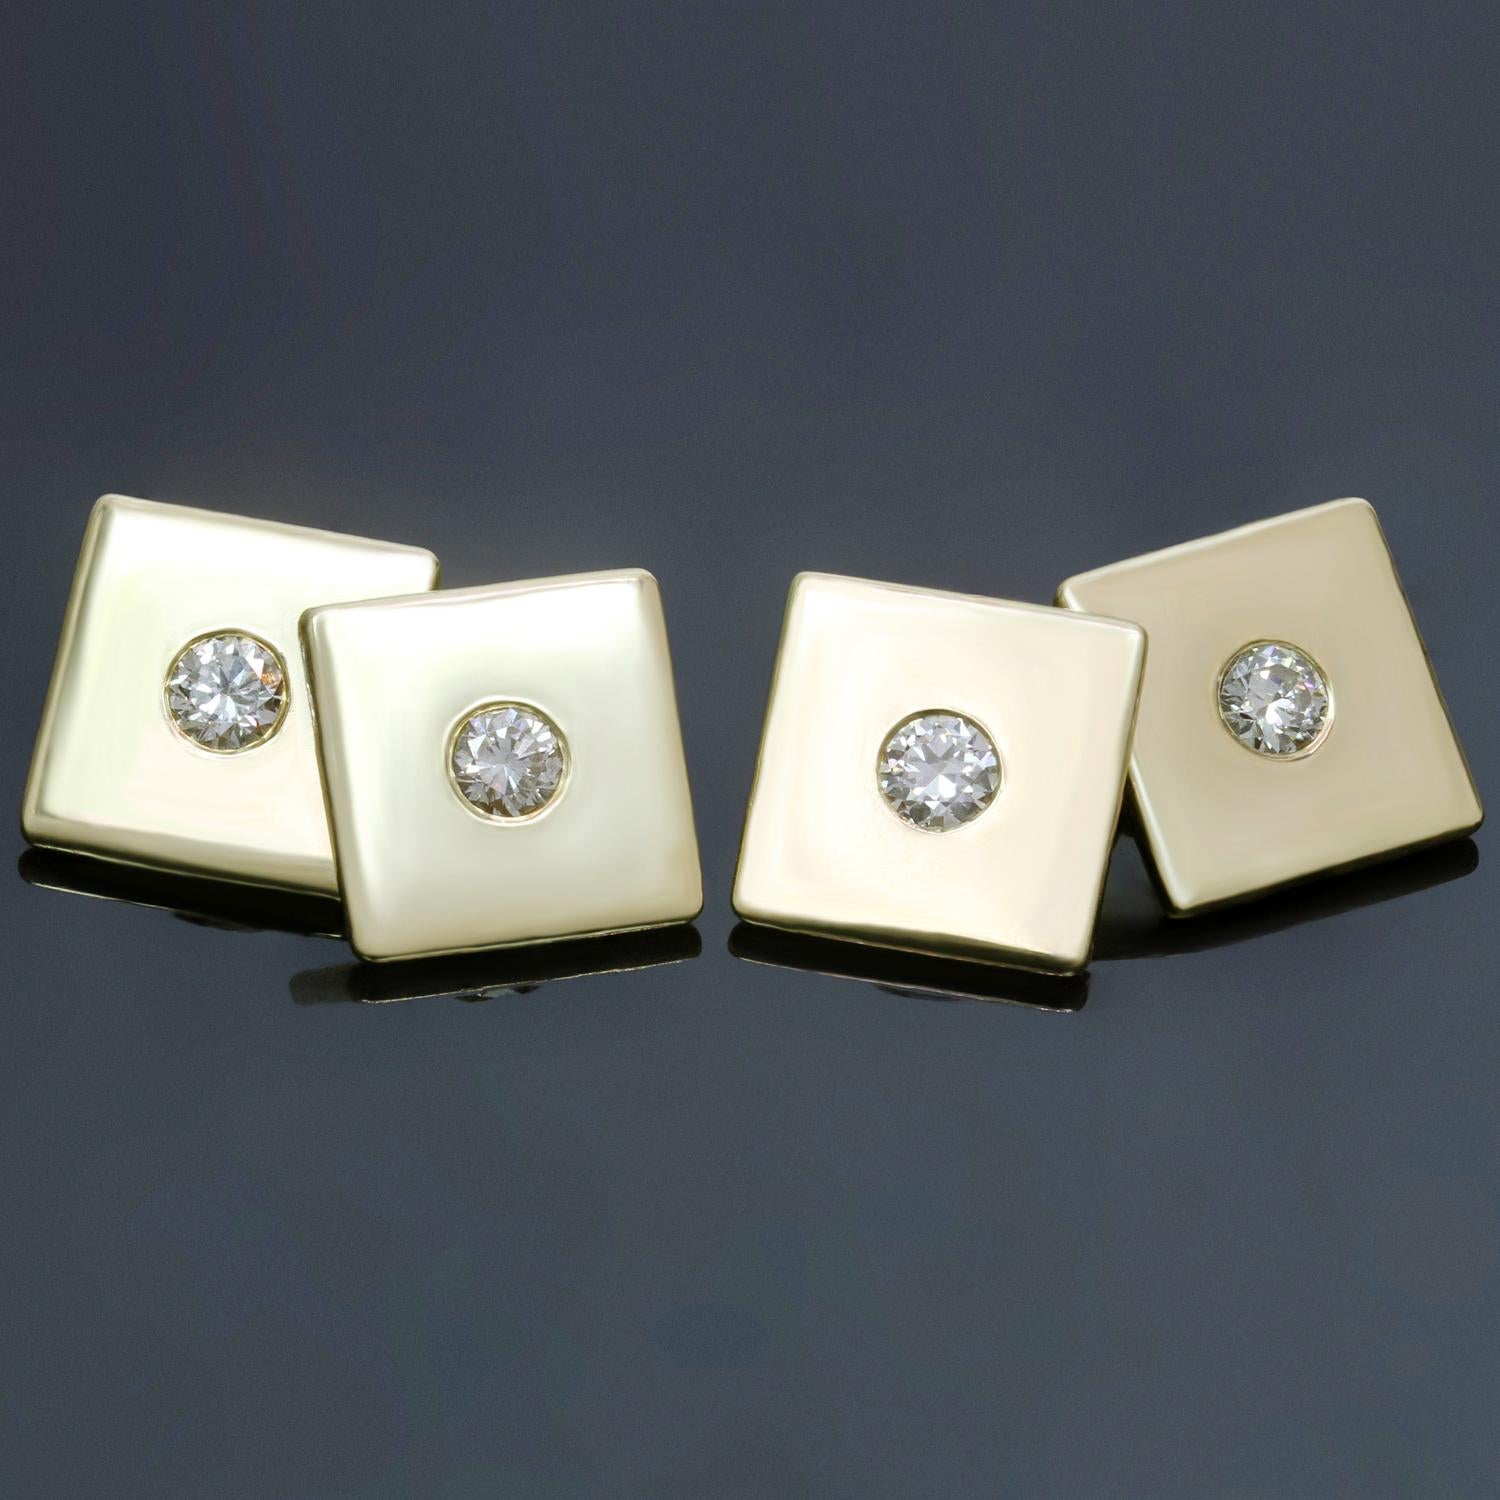 This classic vintage Tiffany & Co. square cufflinks are crafted in 14k yellow gold and set with sparkling round diamonds of an estimated 1.20 carats. Made in United States circa 1940s. Measurements: 0.51